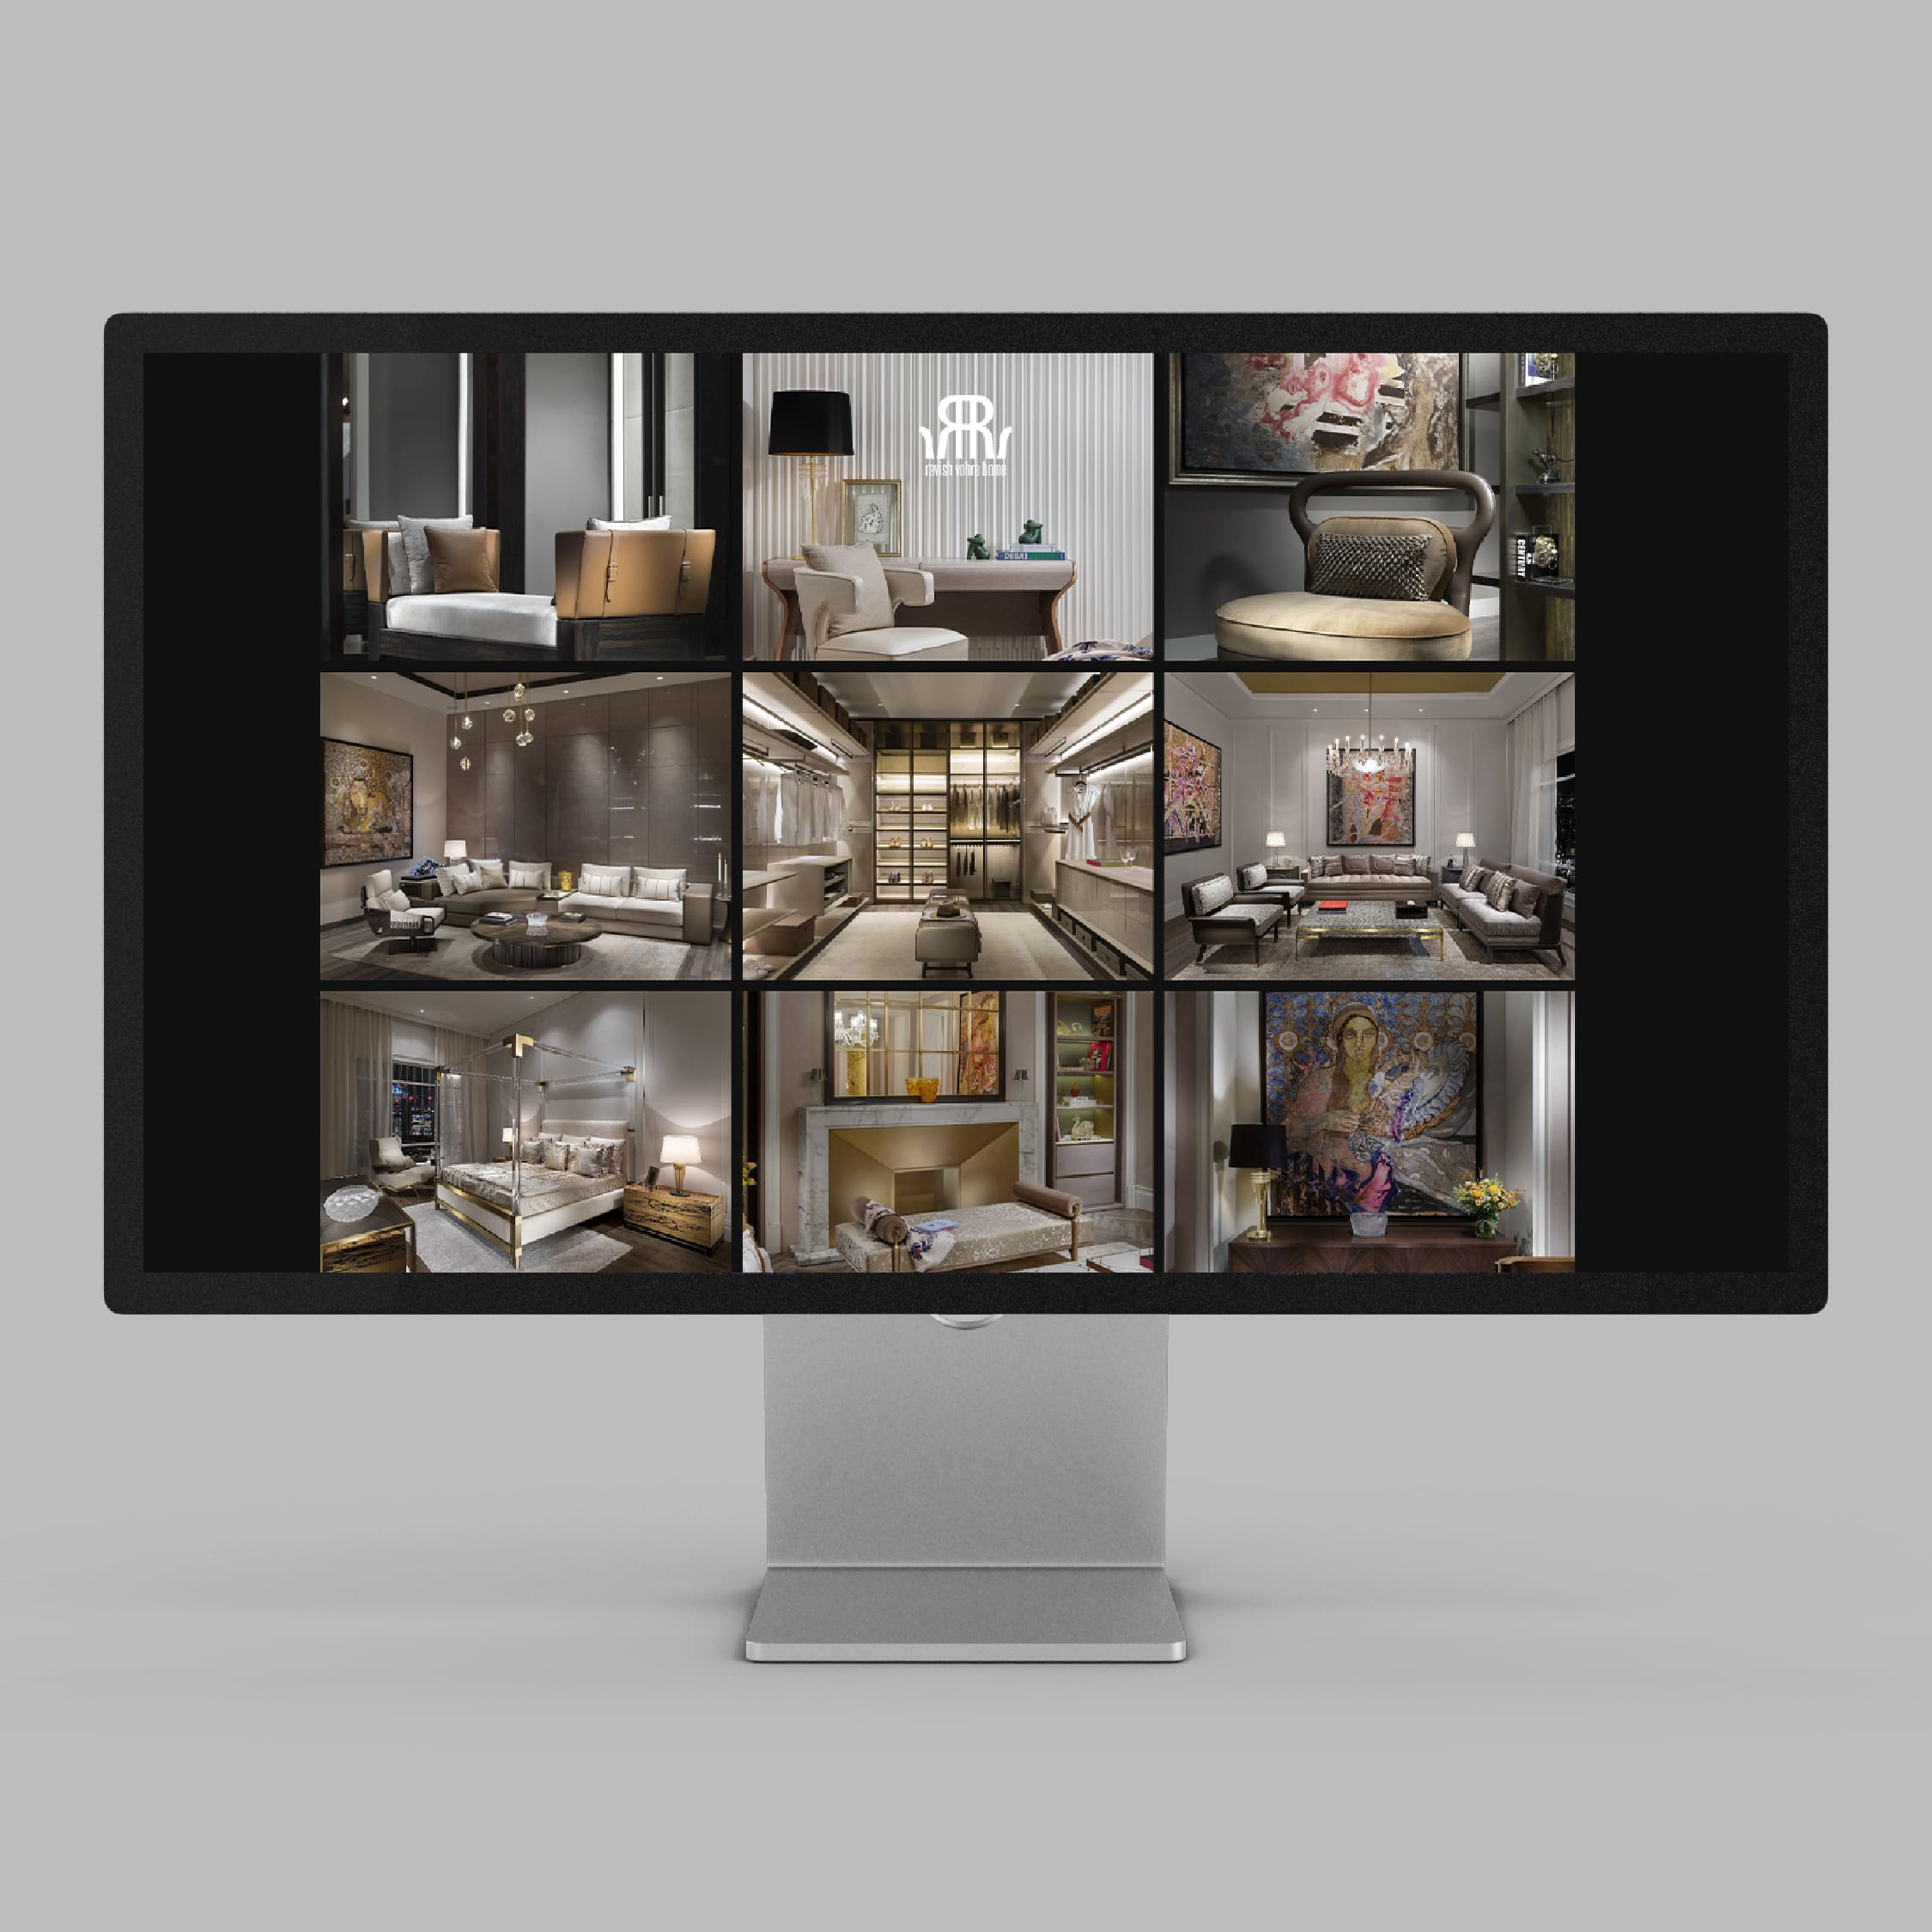 A computer screen with several images of furniture.